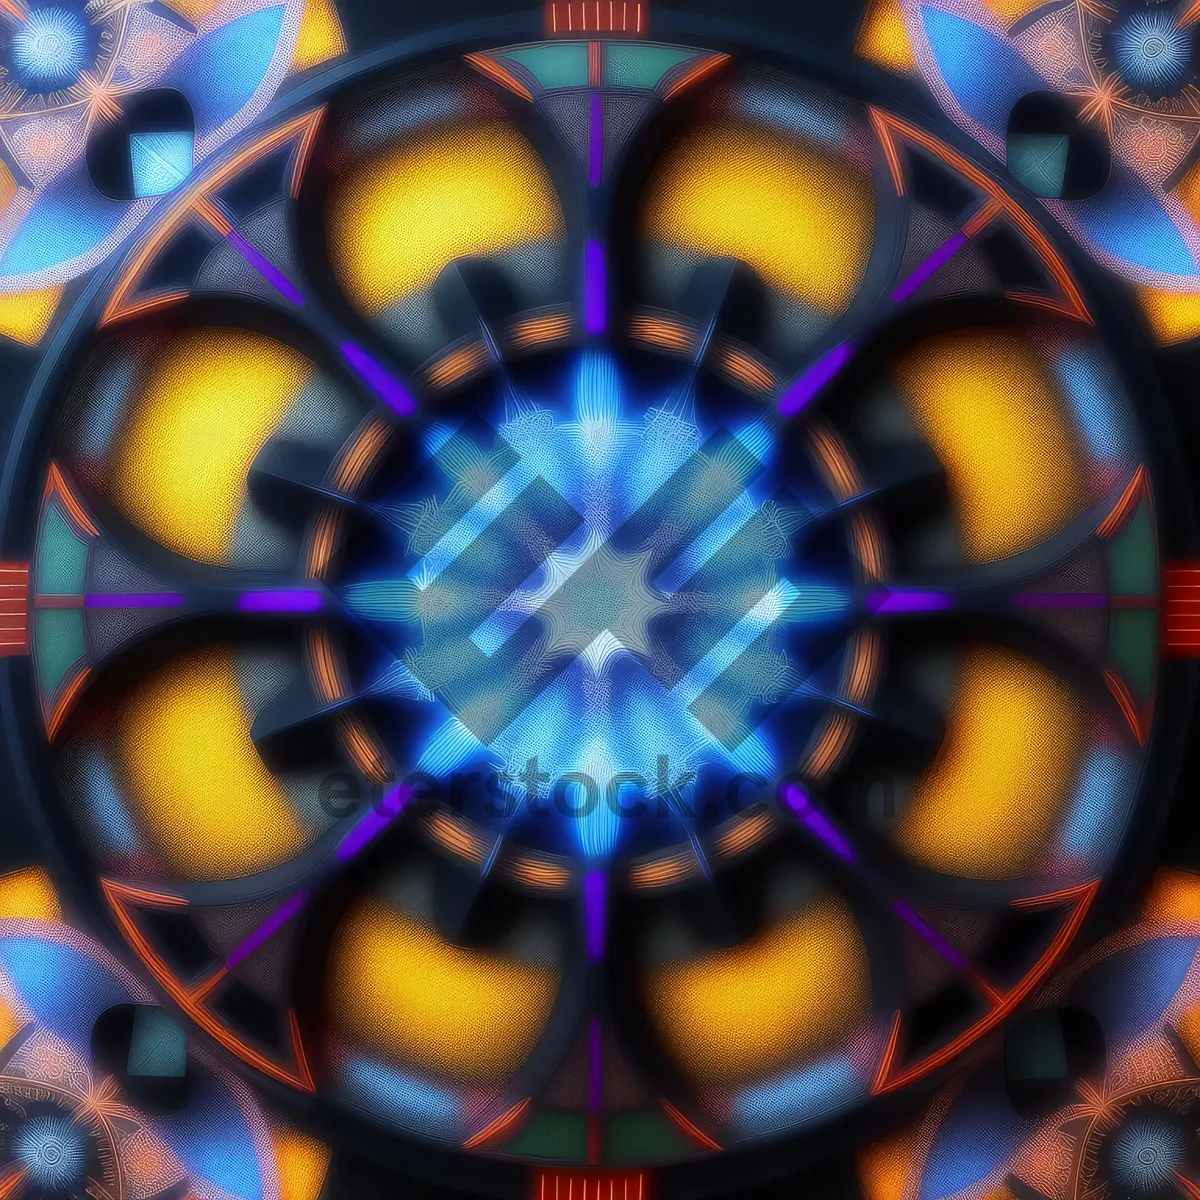 Picture of Vibrant Kaleidoscope Mosaic: Healing Design with Abstract Fractal Patterns